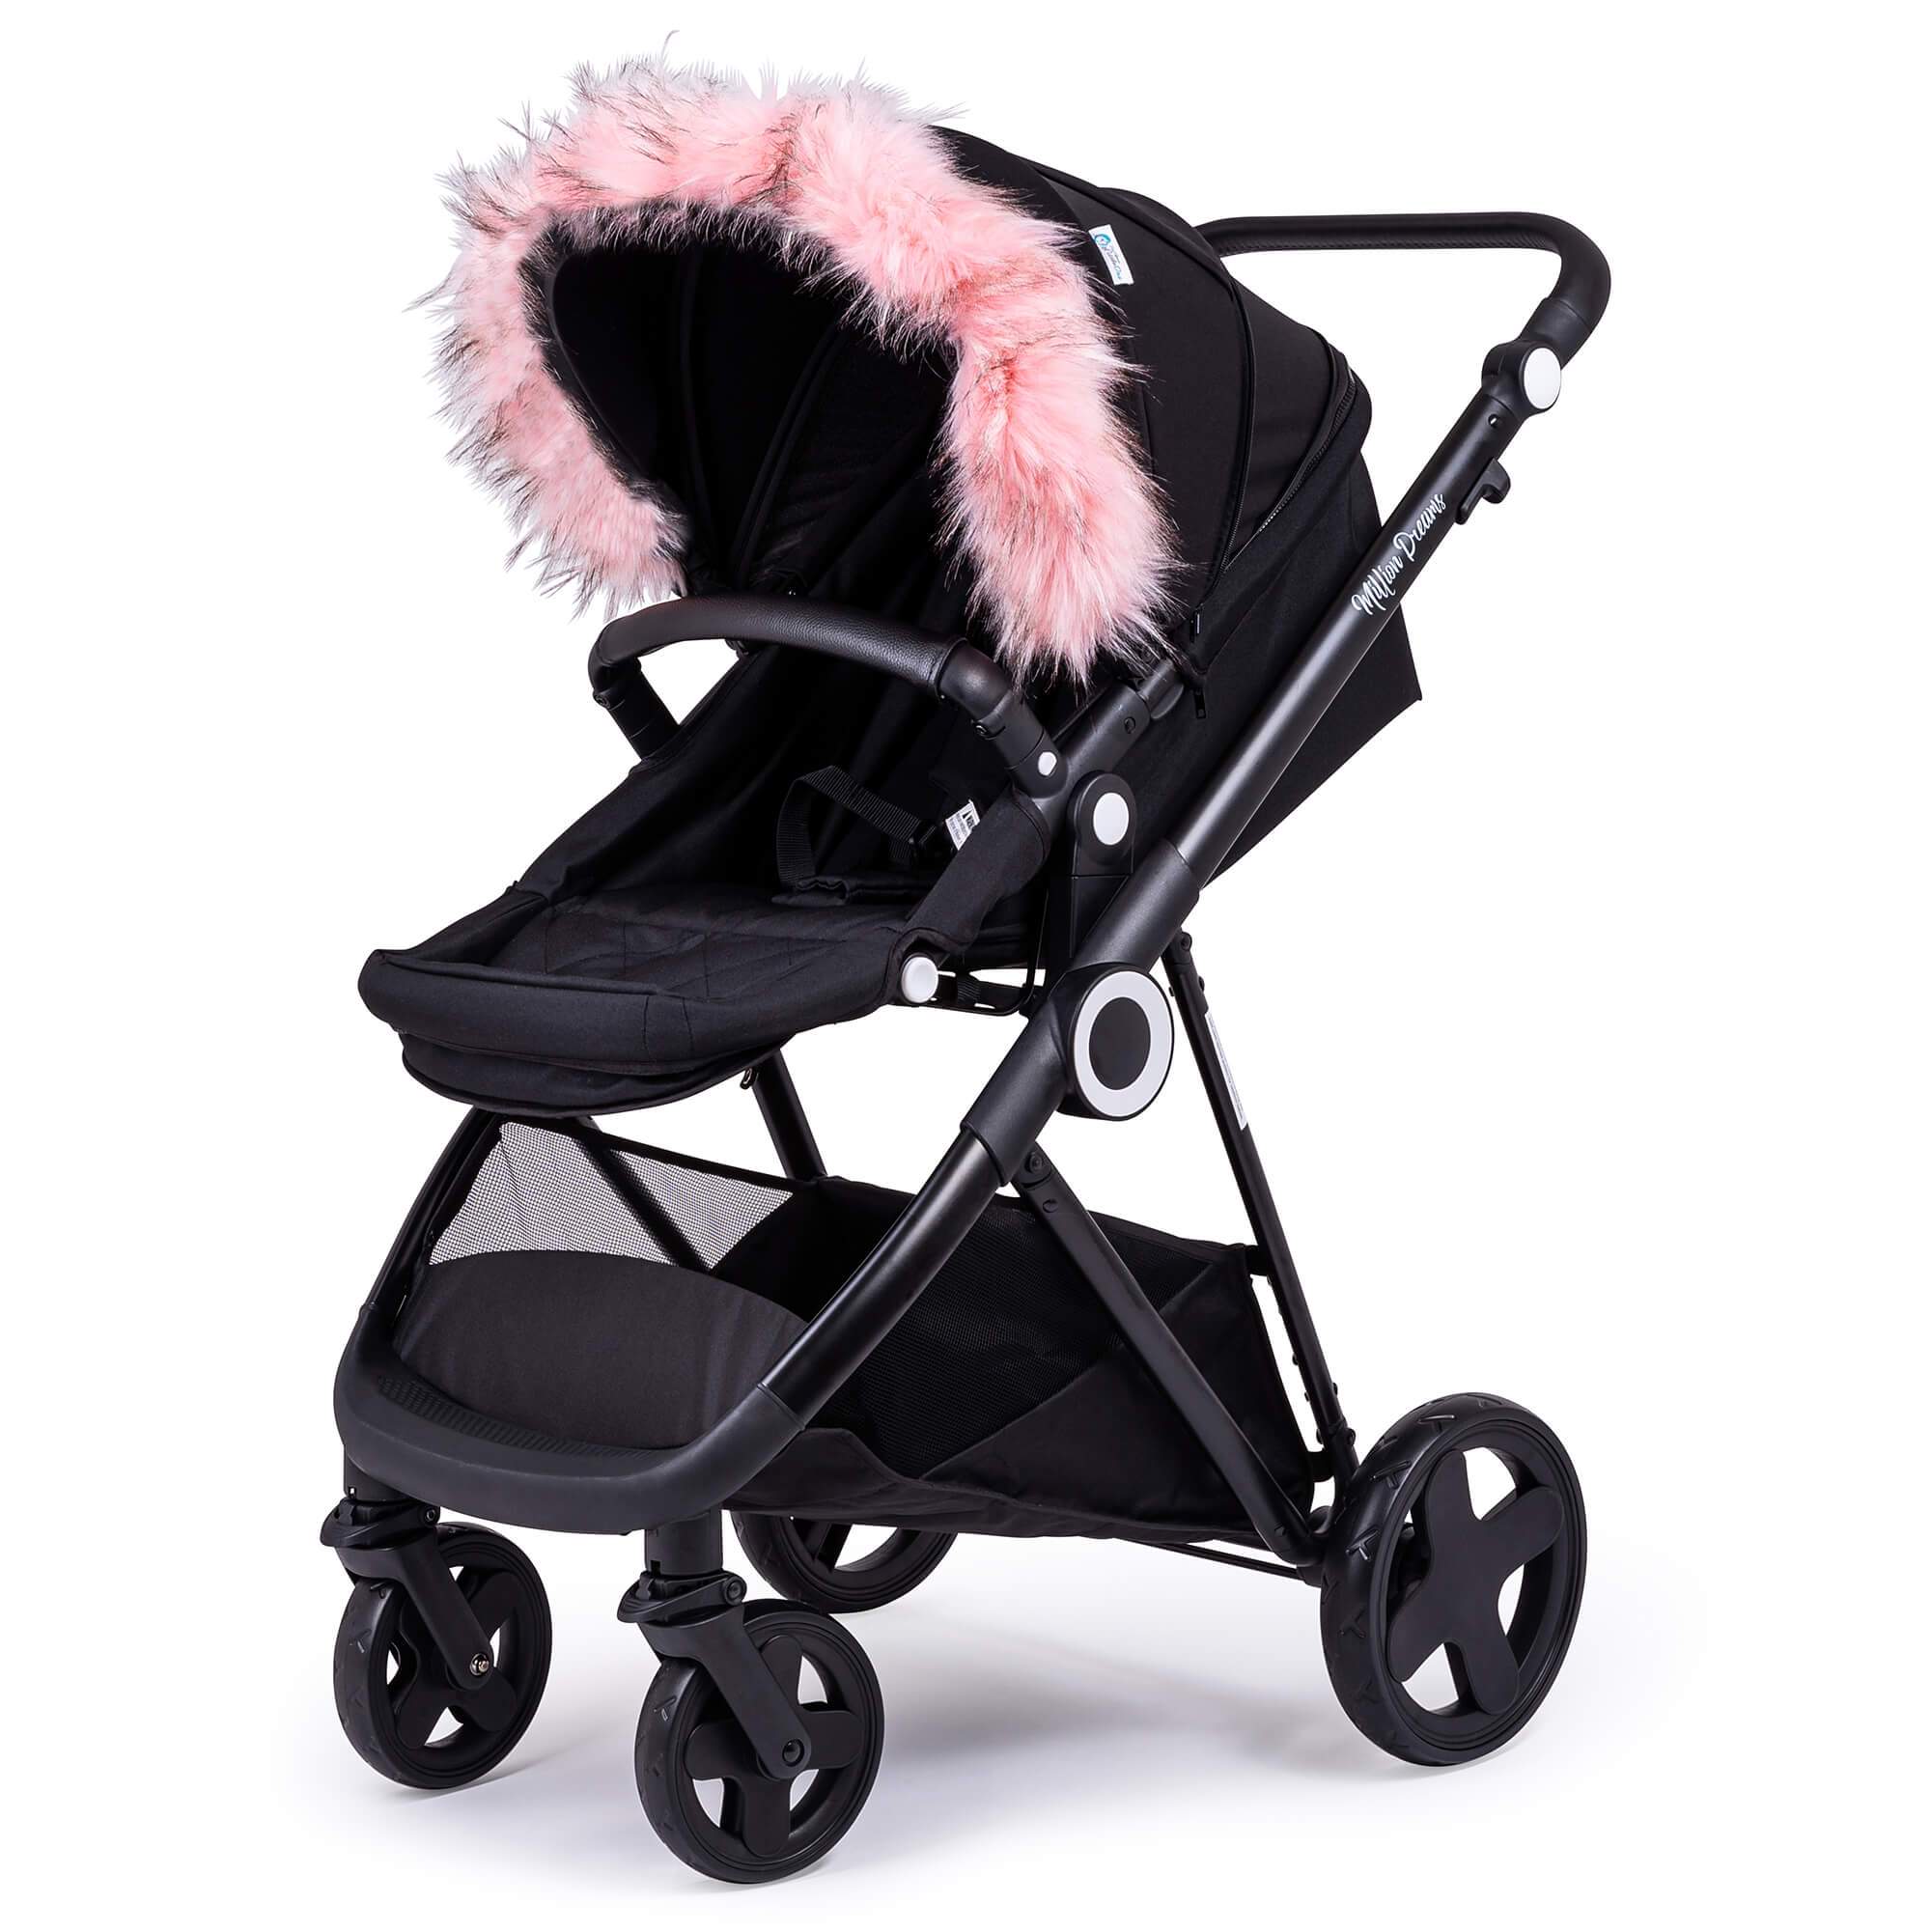 Pram Fur Hood Trim Attachment for Pushchair Compatible with Mutsy - Light Pink / Fits All Models | For Your Little One